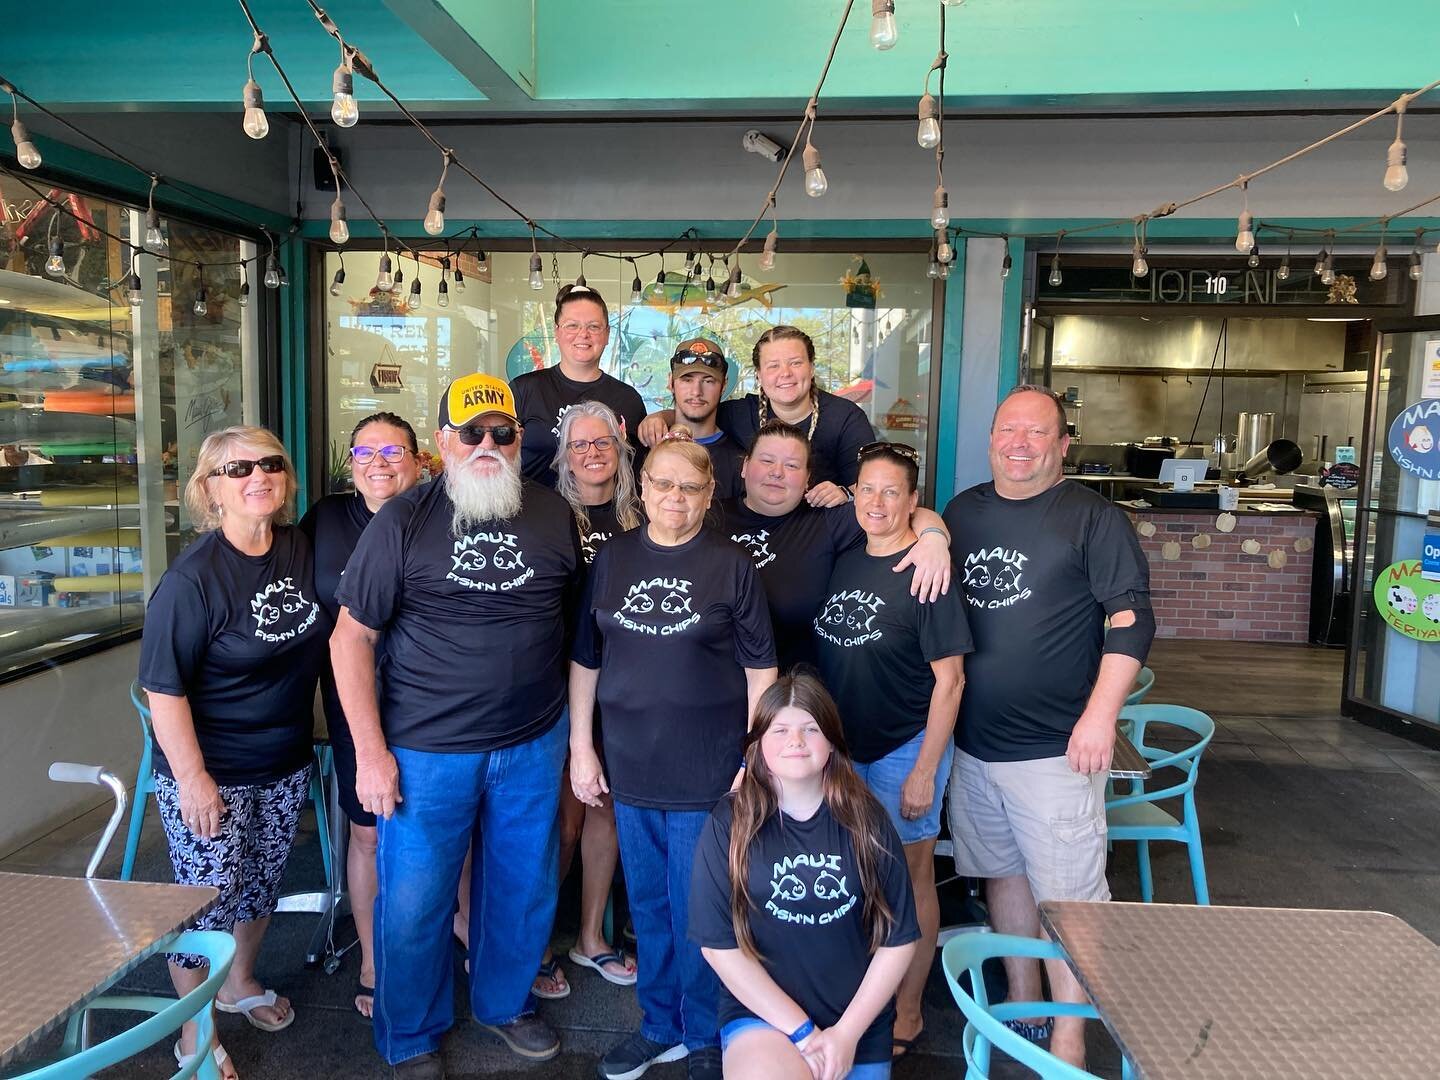 Maui Fish N Chips extended family! Had such a great time visiting with everyone! 

#family #mauifishnchips #hawaii #maui #crazy #fries #fishandchips #matching #kihei #sogood #yummy